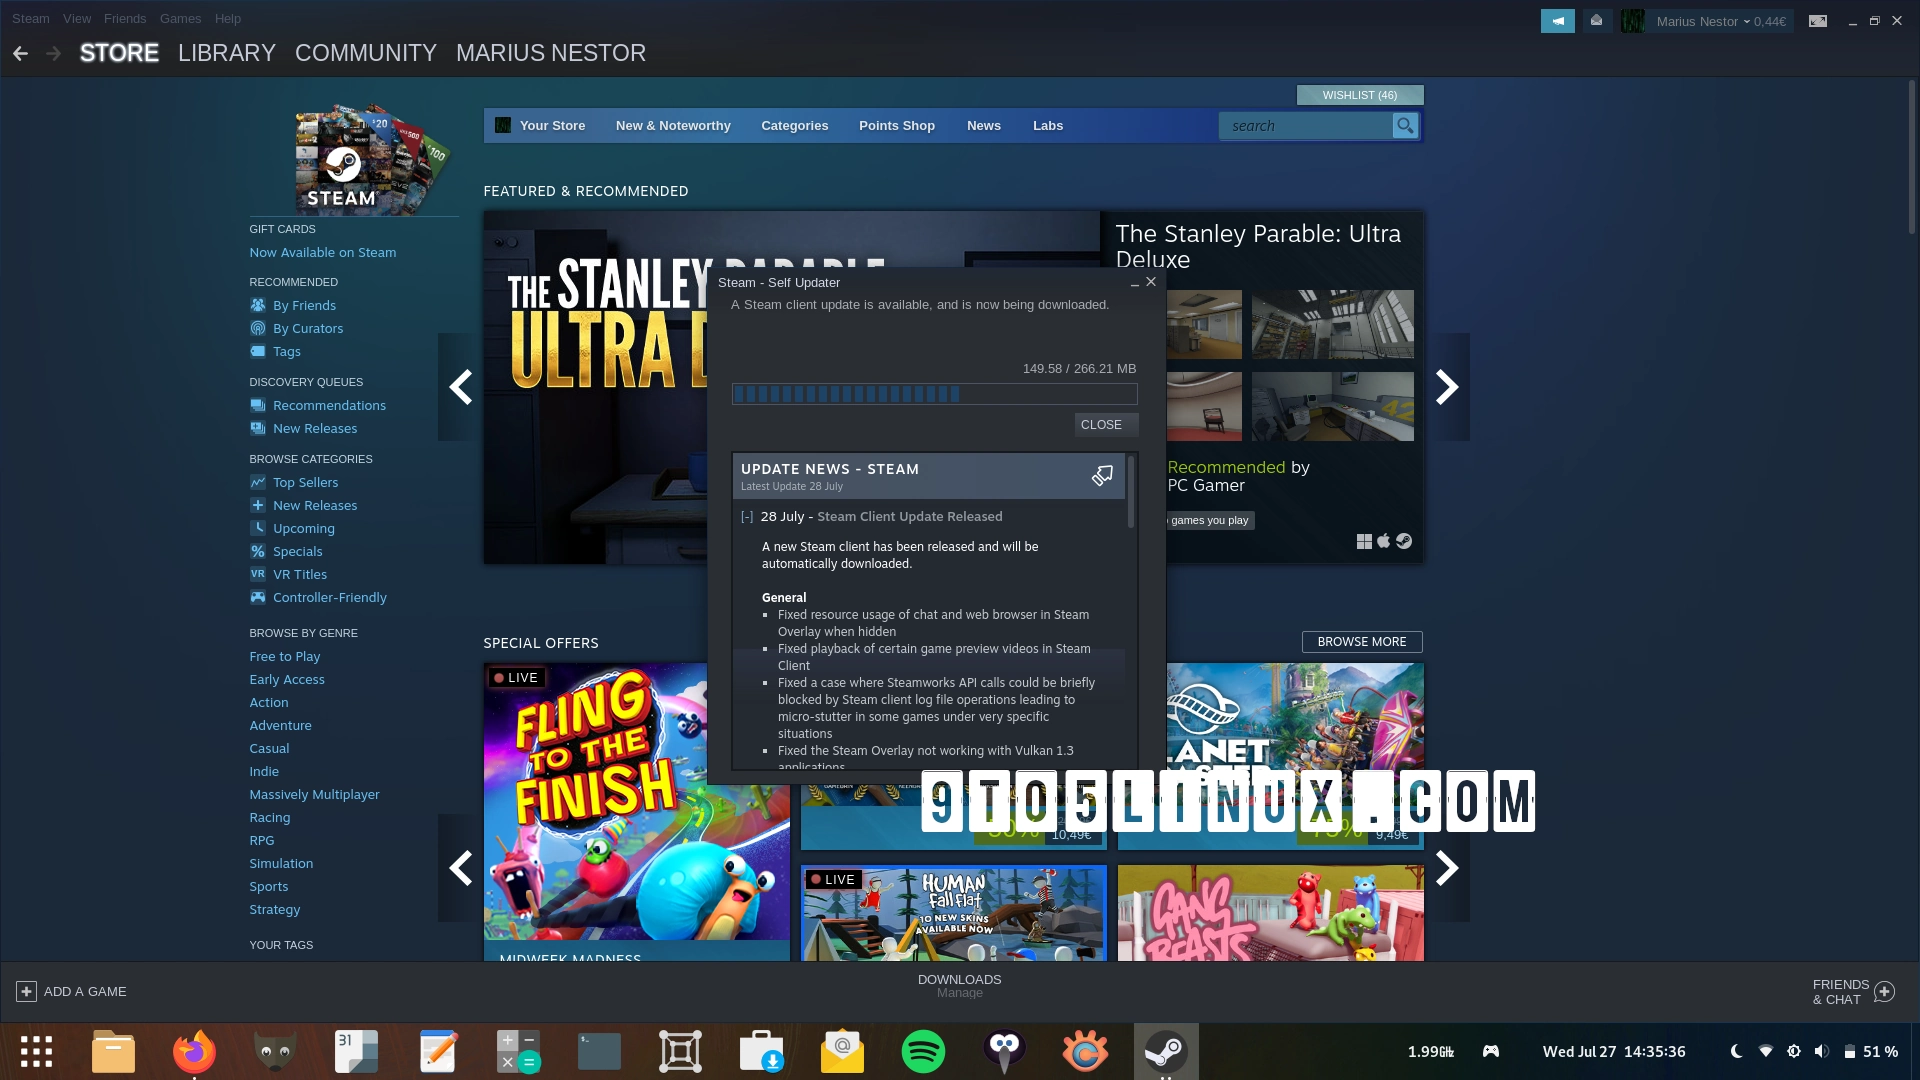 Latest Steam Client Update Brings Linux and Vulkan Fixes, New Controller Support